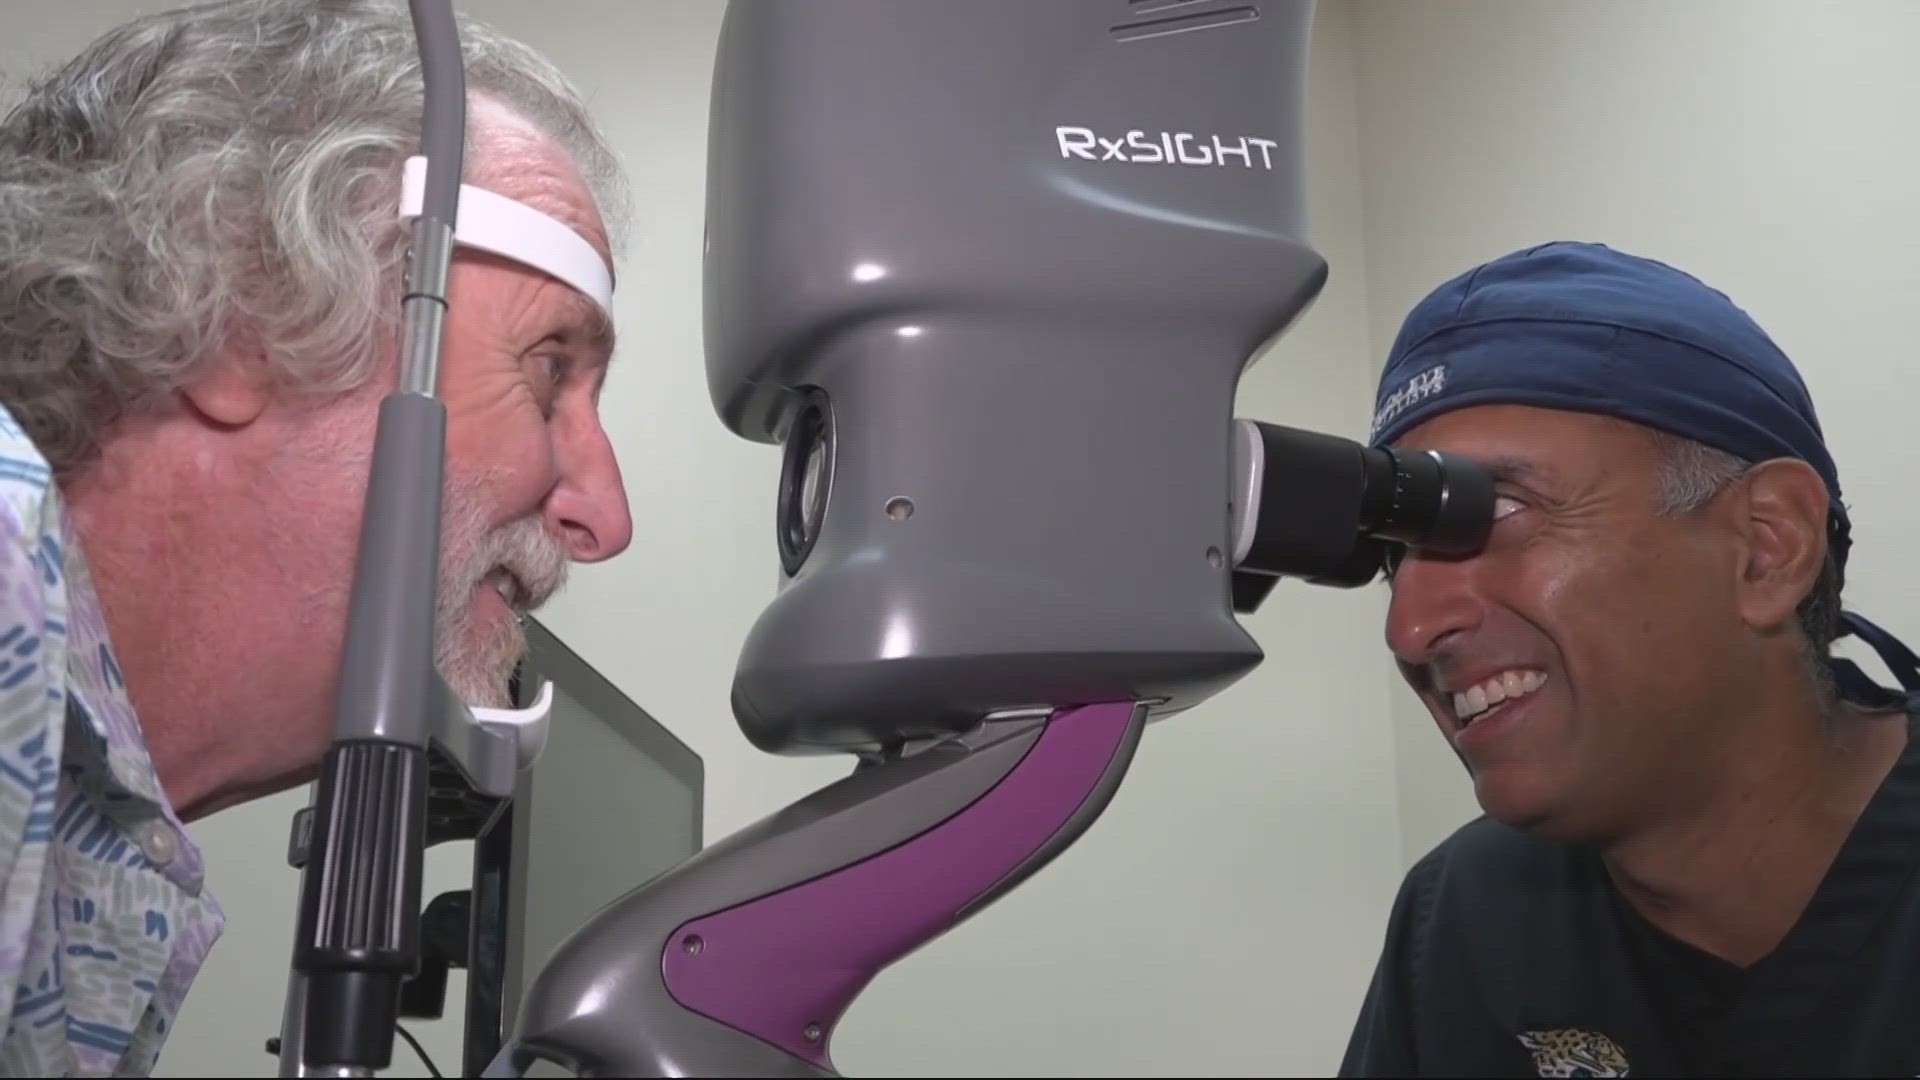 A new cataract procedure introduced at one hospital on the First Coast, allows for your lenses to be changed with UV light, making your eyesight more precise.